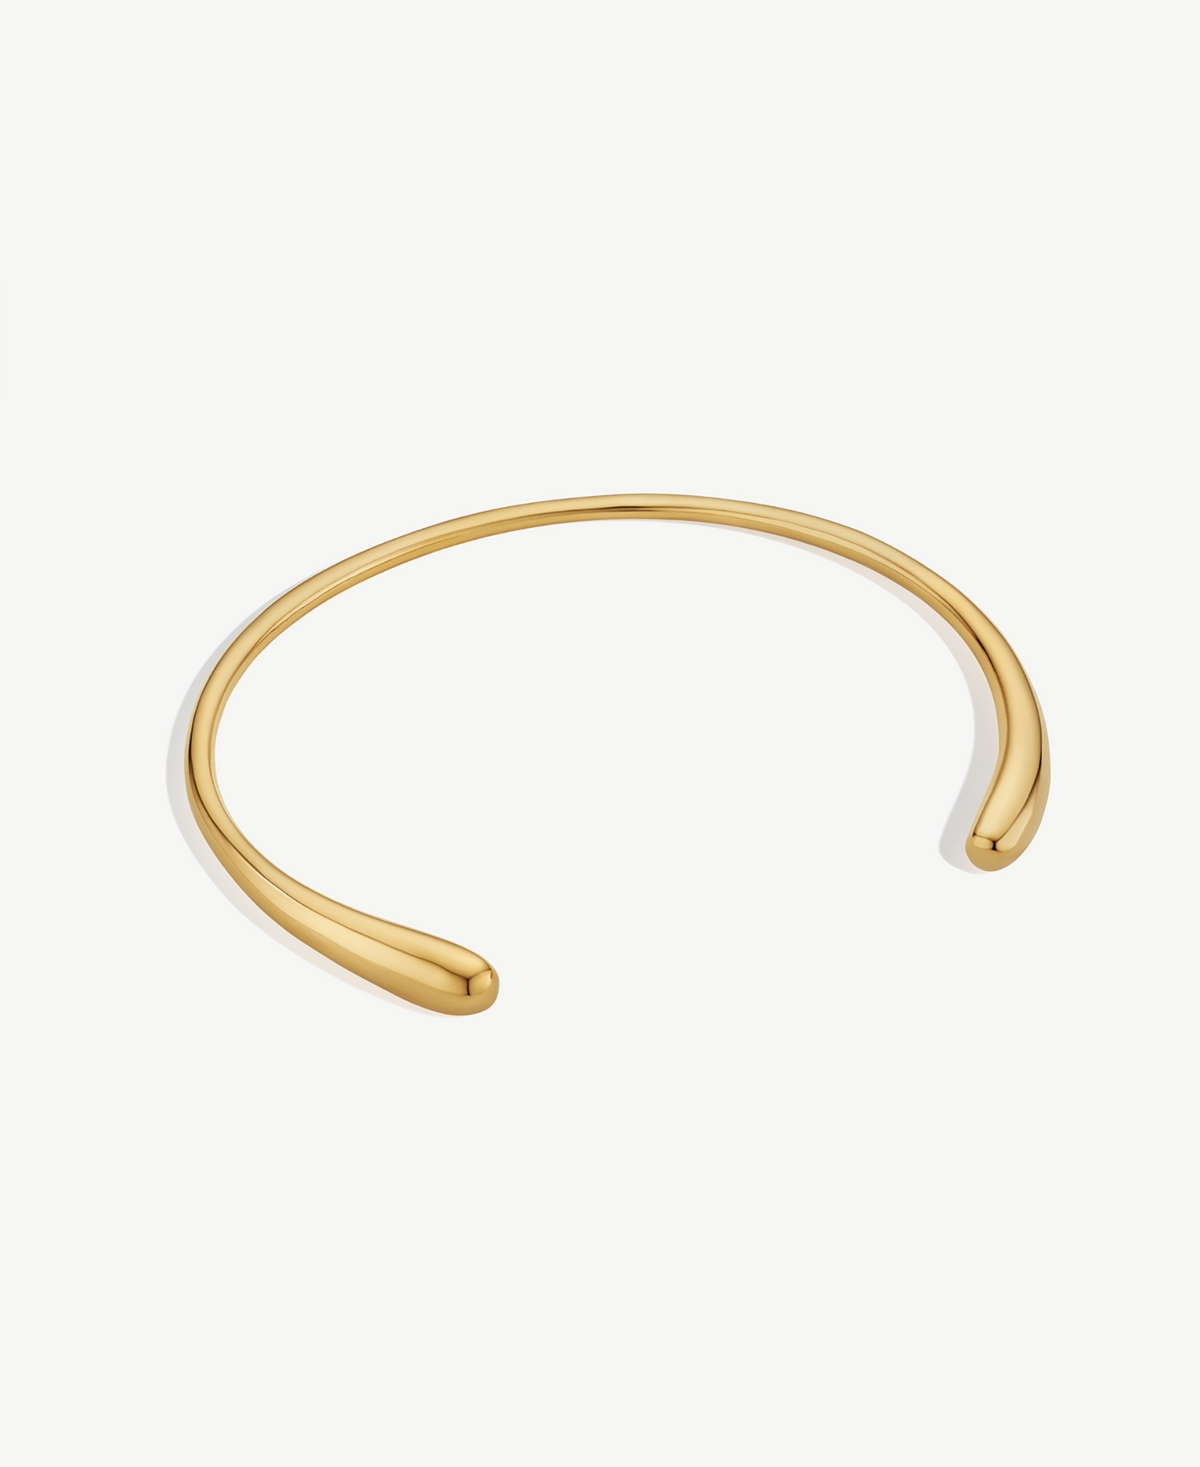 Soko 24k Gold-plated Double Dash Choker Necklace